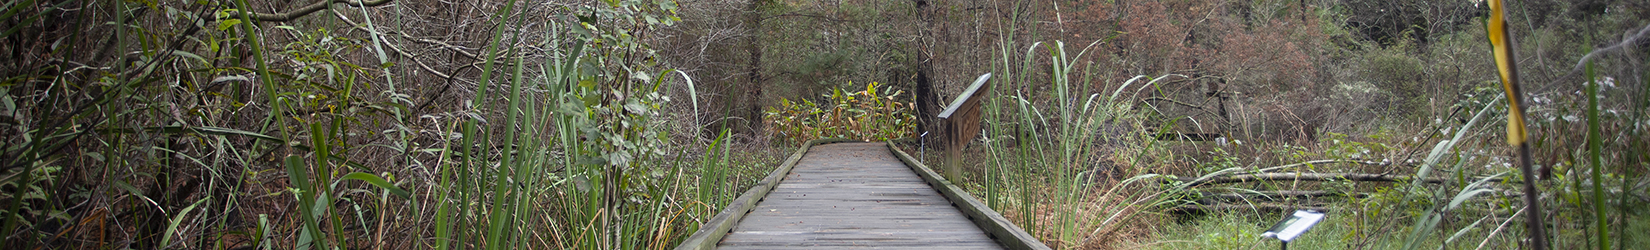 pathway into the Natural Area Teaching Lab at UF/IFAS Entomology and Nematology Department